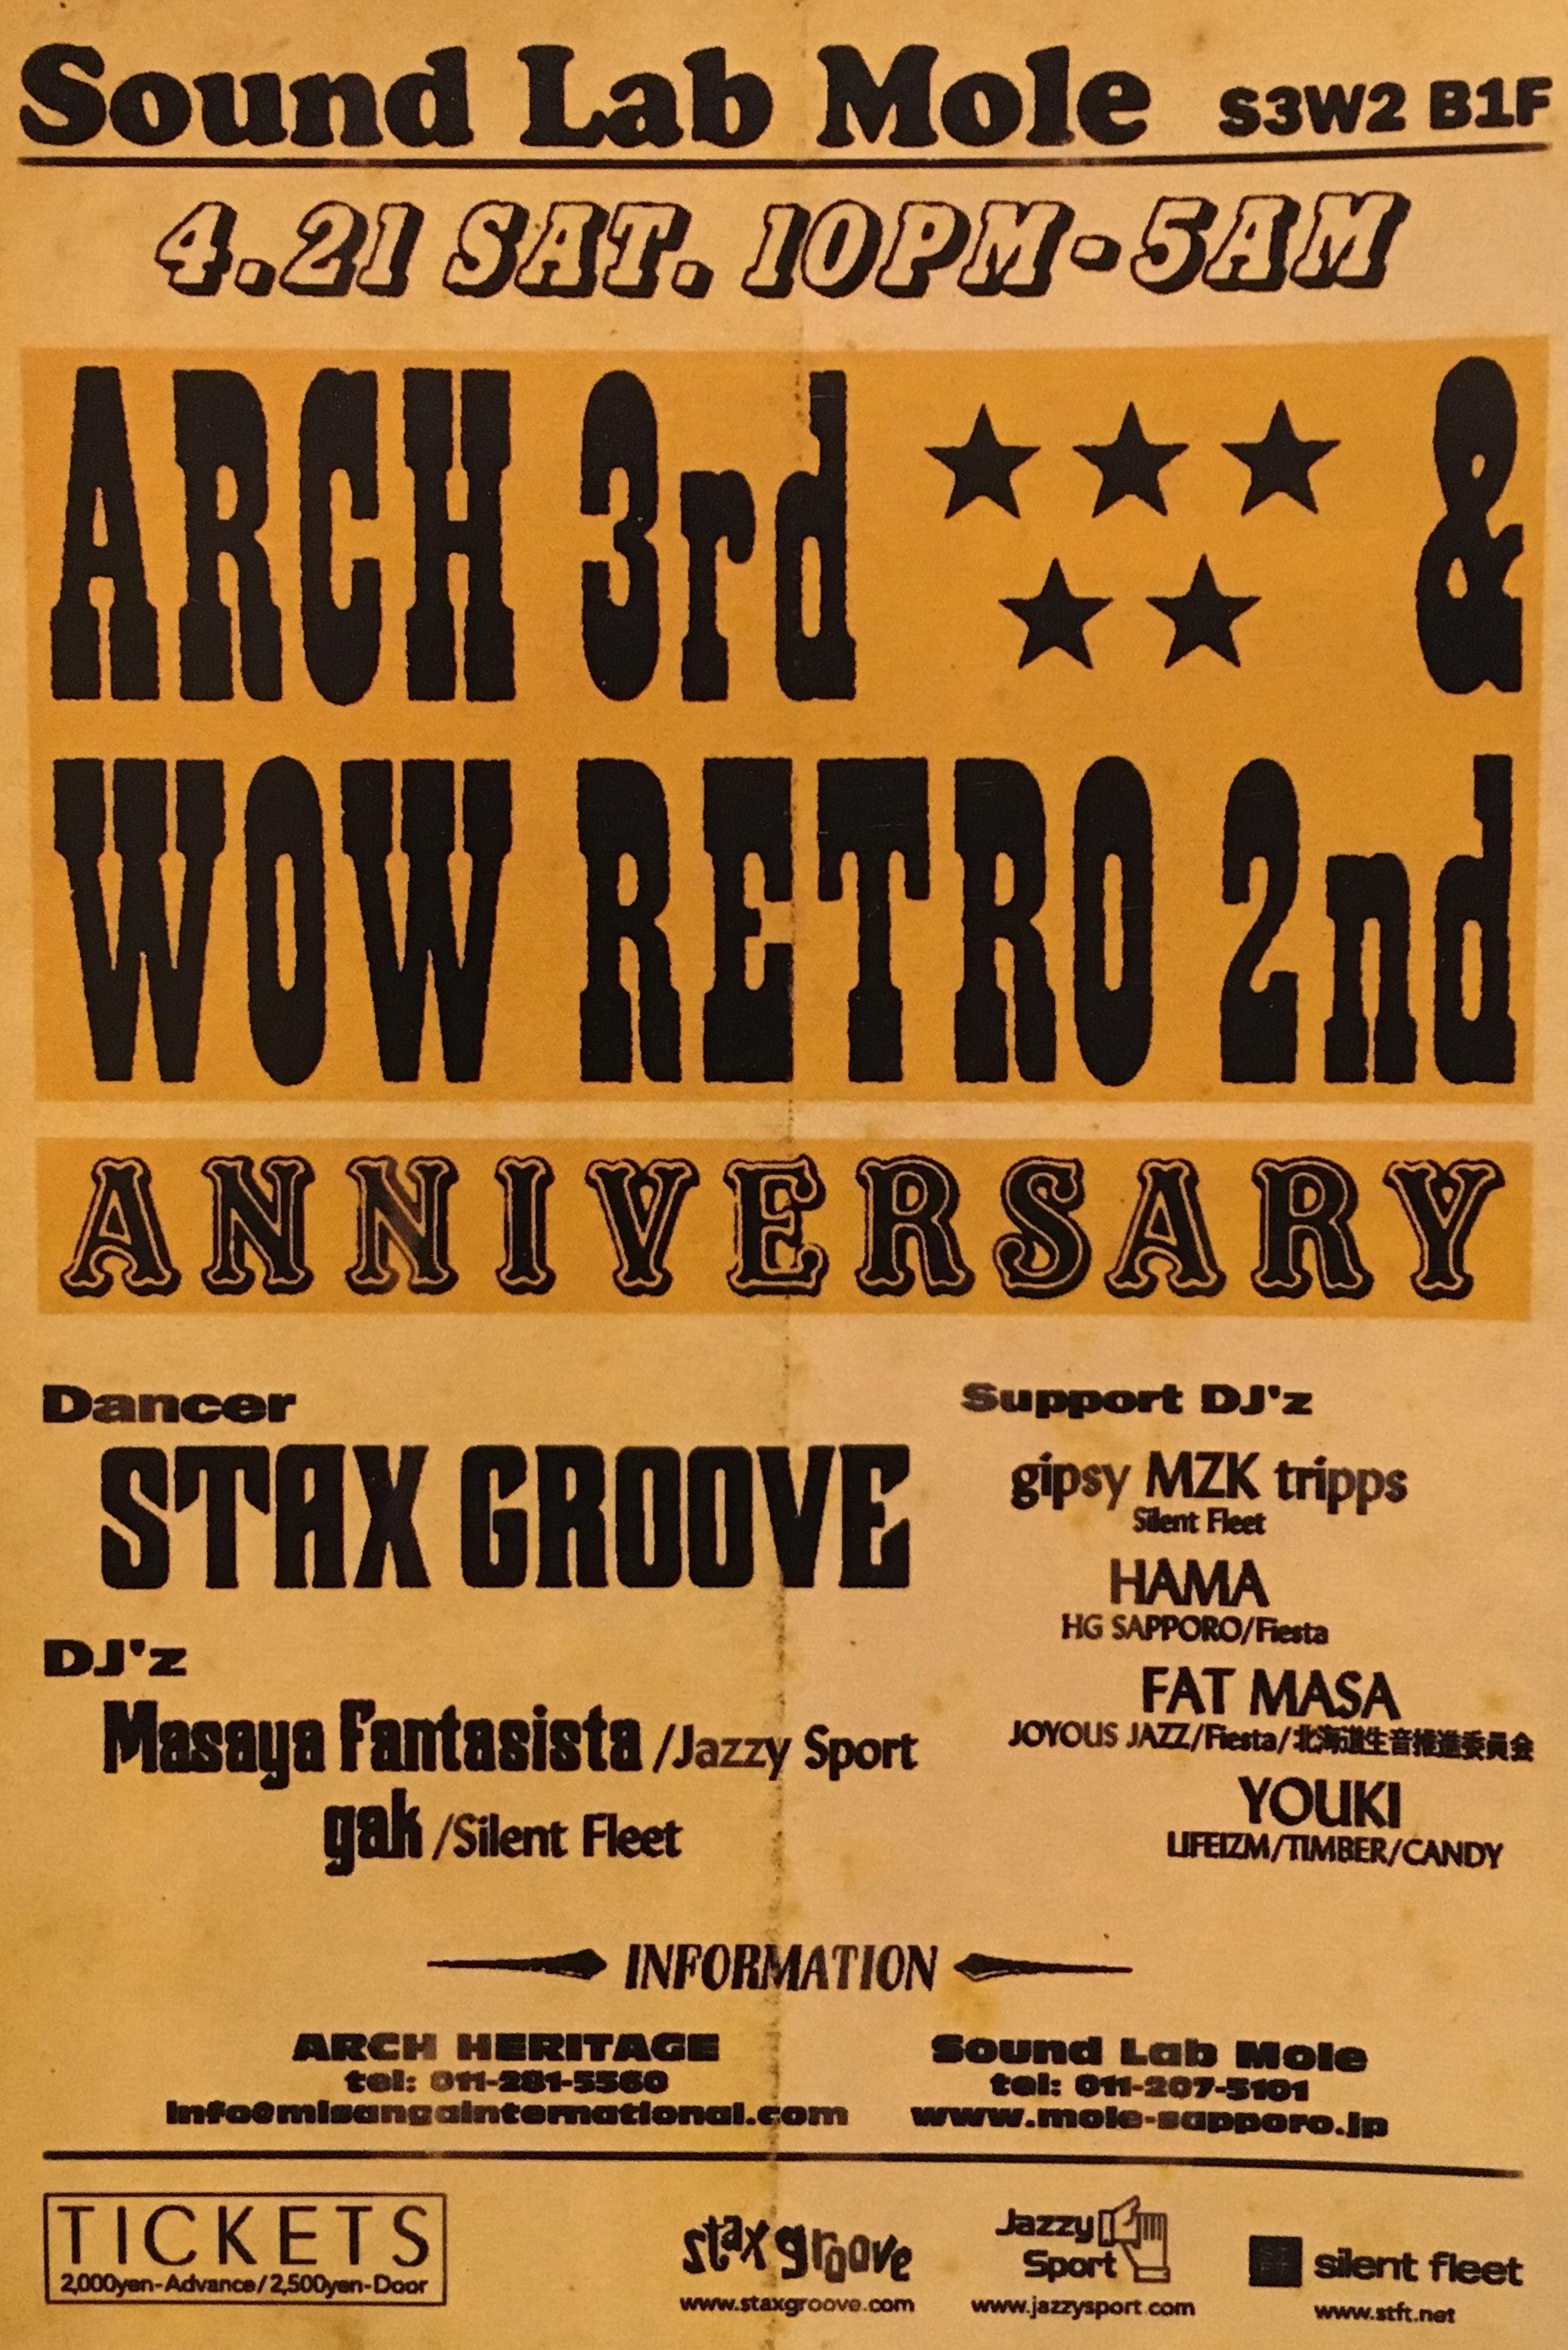 ARCH 3rd & WOW RETRO 2nd ANNIVERSARY